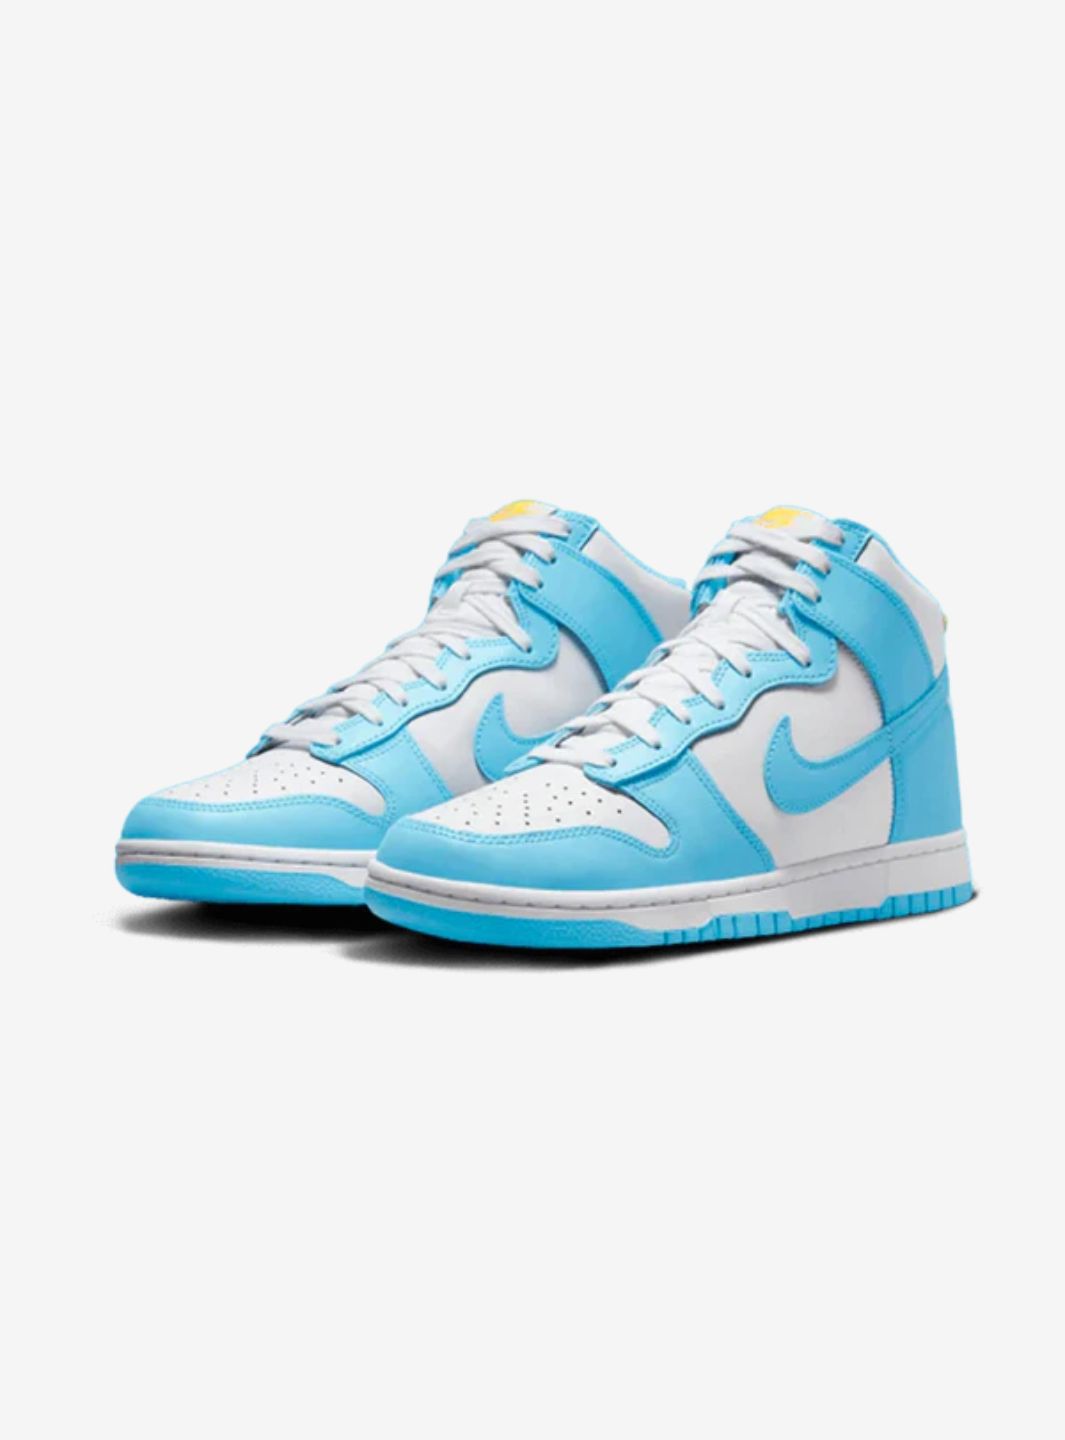 Nike Dunk High Blue Chill - DD1399-401 | ResellZone